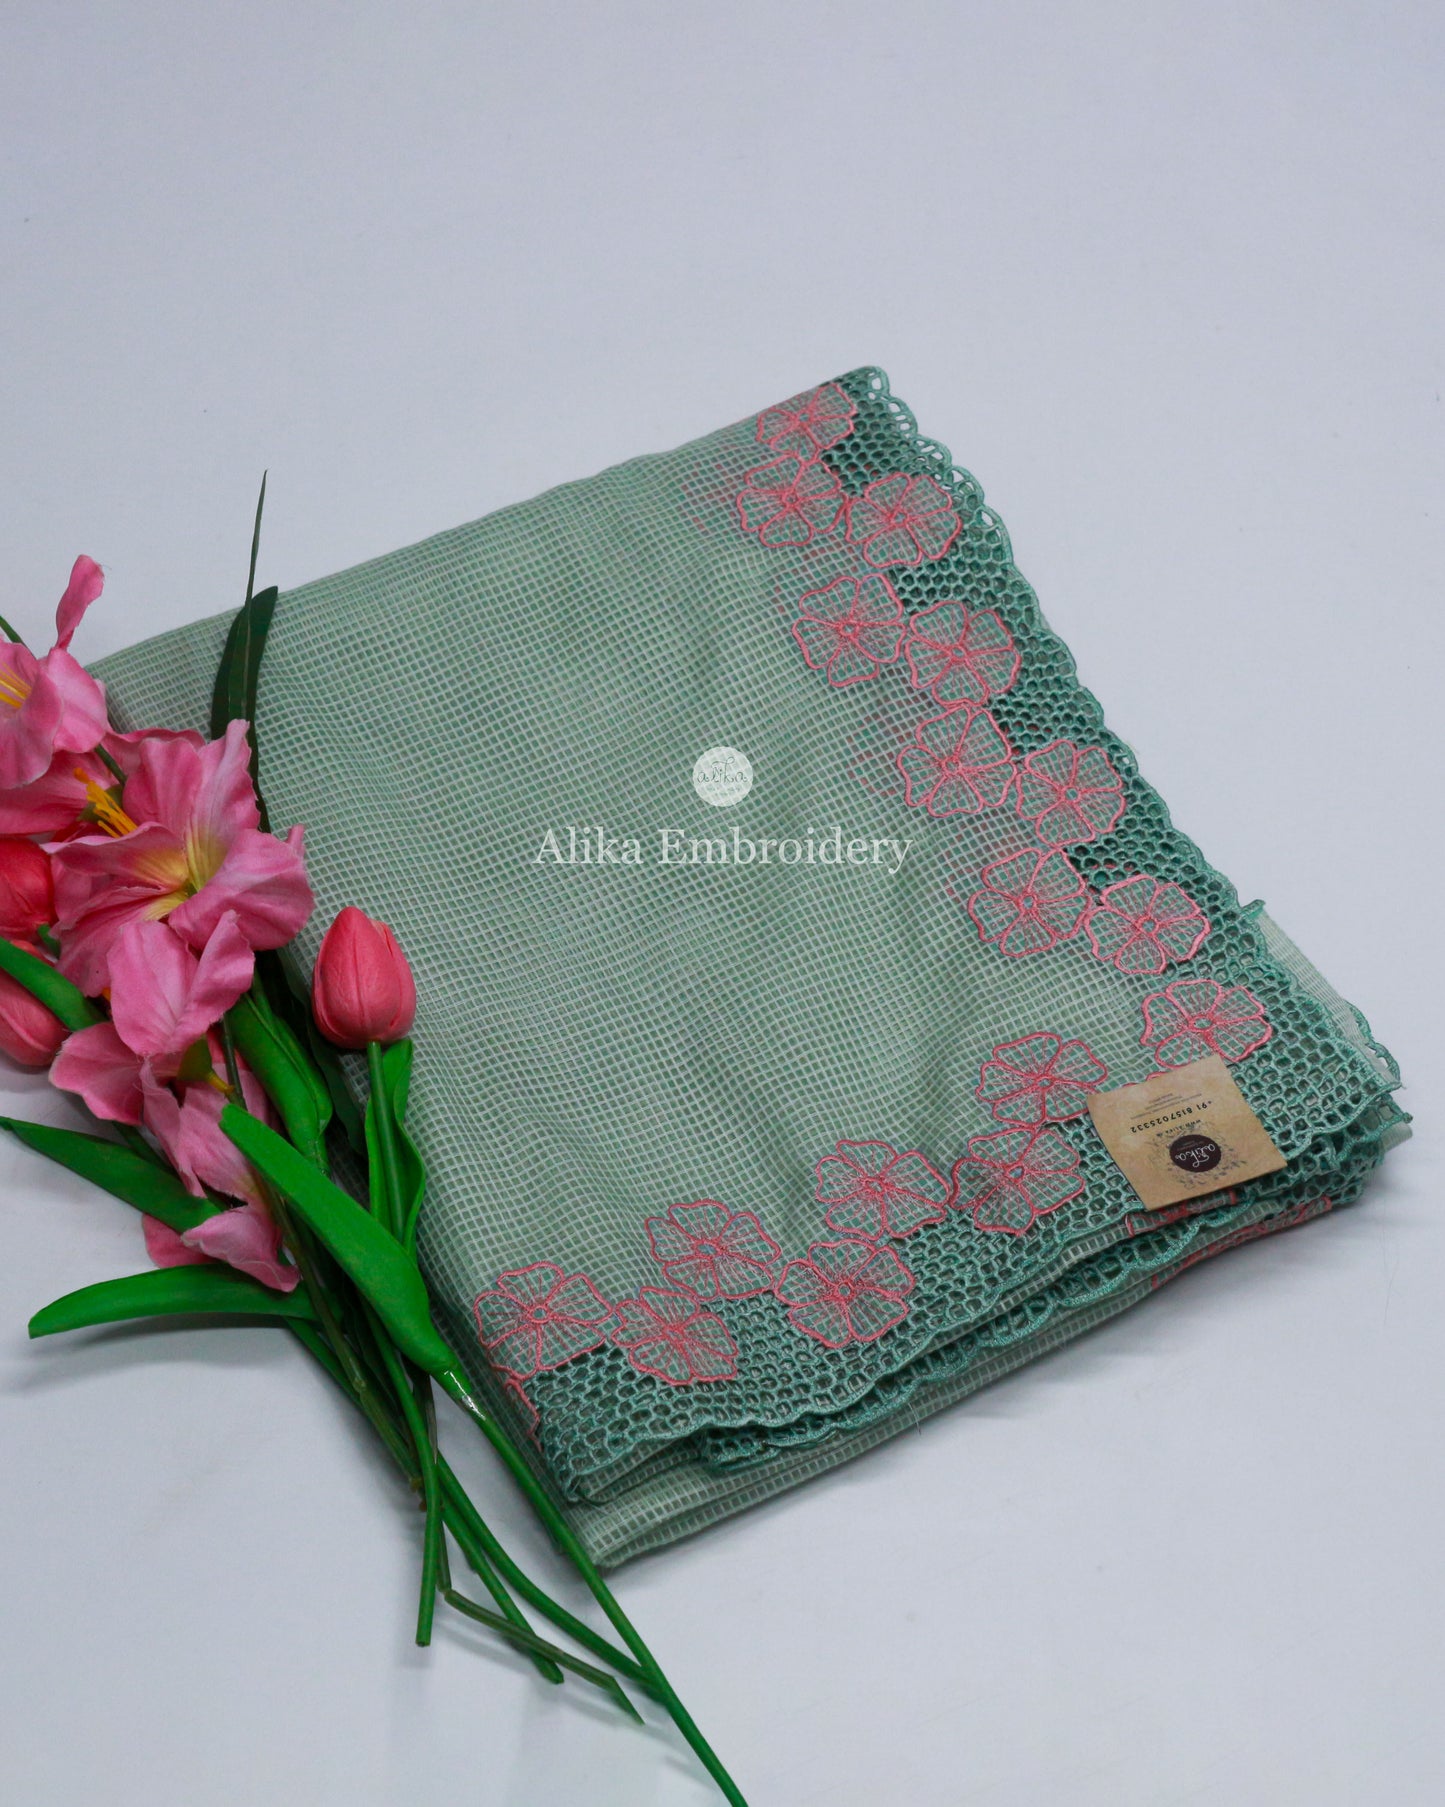 Enchanting Green Shaded checkedSemi Tussar Saree with Floral Embroidery and Full Border Cutwork